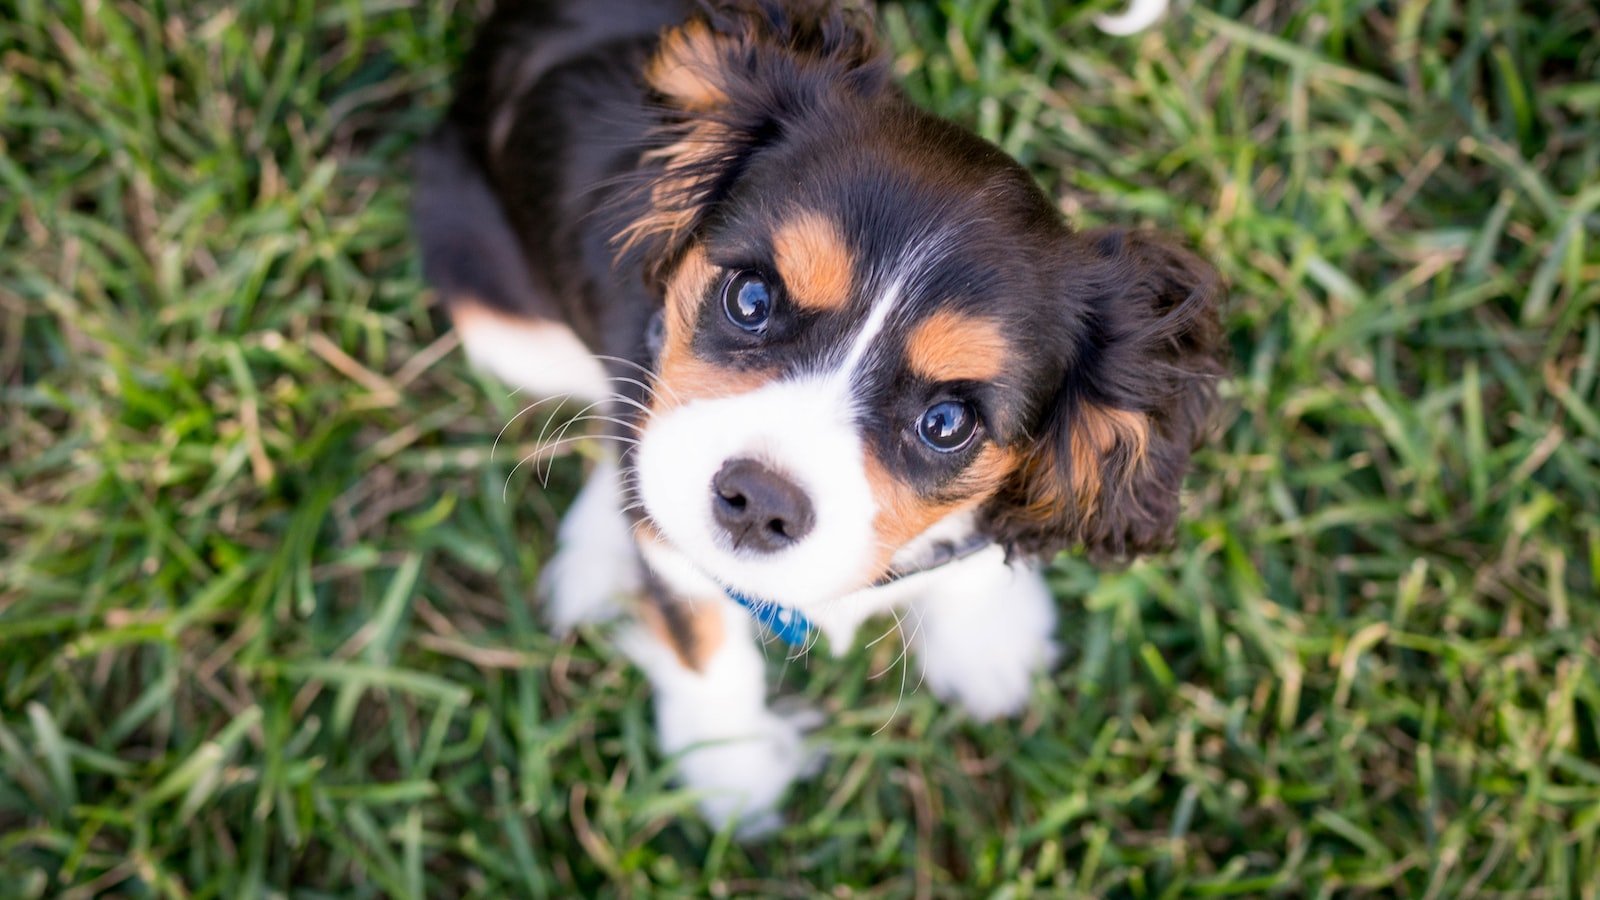 Important Considerations for Puppies in High-Risk Areas